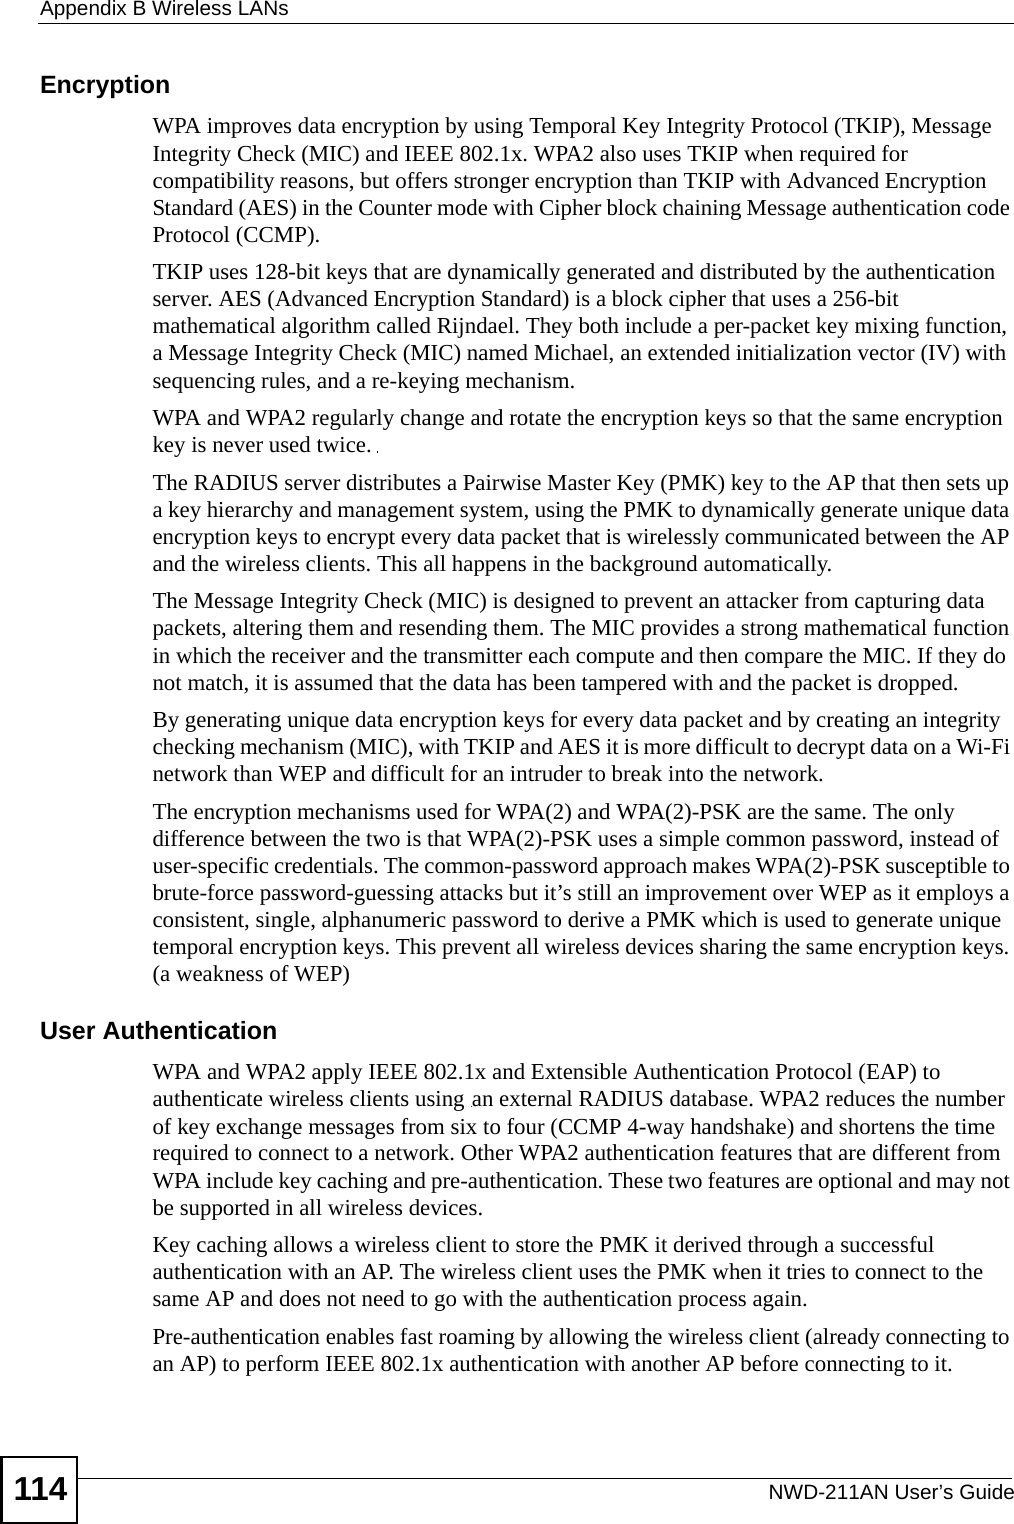 Appendix B Wireless LANsNWD-211AN User’s Guide114Encryption WPA improves data encryption by using Temporal Key Integrity Protocol (TKIP), Message Integrity Check (MIC) and IEEE 802.1x. WPA2 also uses TKIP when required for compatibility reasons, but offers stronger encryption than TKIP with Advanced Encryption Standard (AES) in the Counter mode with Cipher block chaining Message authentication code Protocol (CCMP).TKIP uses 128-bit keys that are dynamically generated and distributed by the authentication server. AES (Advanced Encryption Standard) is a block cipher that uses a 256-bit mathematical algorithm called Rijndael. They both include a per-packet key mixing function, a Message Integrity Check (MIC) named Michael, an extended initialization vector (IV) with sequencing rules, and a re-keying mechanism.WPA and WPA2 regularly change and rotate the encryption keys so that the same encryption key is never used twice. The RADIUS server distributes a Pairwise Master Key (PMK) key to the AP that then sets up a key hierarchy and management system, using the PMK to dynamically generate unique data encryption keys to encrypt every data packet that is wirelessly communicated between the AP and the wireless clients. This all happens in the background automatically.The Message Integrity Check (MIC) is designed to prevent an attacker from capturing data packets, altering them and resending them. The MIC provides a strong mathematical function in which the receiver and the transmitter each compute and then compare the MIC. If they do not match, it is assumed that the data has been tampered with and the packet is dropped. By generating unique data encryption keys for every data packet and by creating an integrity checking mechanism (MIC), with TKIP and AES it is more difficult to decrypt data on a Wi-Fi network than WEP and difficult for an intruder to break into the network. The encryption mechanisms used for WPA(2) and WPA(2)-PSK are the same. The only difference between the two is that WPA(2)-PSK uses a simple common password, instead of user-specific credentials. The common-password approach makes WPA(2)-PSK susceptible to brute-force password-guessing attacks but it’s still an improvement over WEP as it employs a consistent, single, alphanumeric password to derive a PMK which is used to generate unique temporal encryption keys. This prevent all wireless devices sharing the same encryption keys. (a weakness of WEP)User Authentication WPA and WPA2 apply IEEE 802.1x and Extensible Authentication Protocol (EAP) to authenticate wireless clients using an external RADIUS database. WPA2 reduces the number of key exchange messages from six to four (CCMP 4-way handshake) and shortens the time required to connect to a network. Other WPA2 authentication features that are different from WPA include key caching and pre-authentication. These two features are optional and may not be supported in all wireless devices.Key caching allows a wireless client to store the PMK it derived through a successful authentication with an AP. The wireless client uses the PMK when it tries to connect to the same AP and does not need to go with the authentication process again.Pre-authentication enables fast roaming by allowing the wireless client (already connecting to an AP) to perform IEEE 802.1x authentication with another AP before connecting to it.